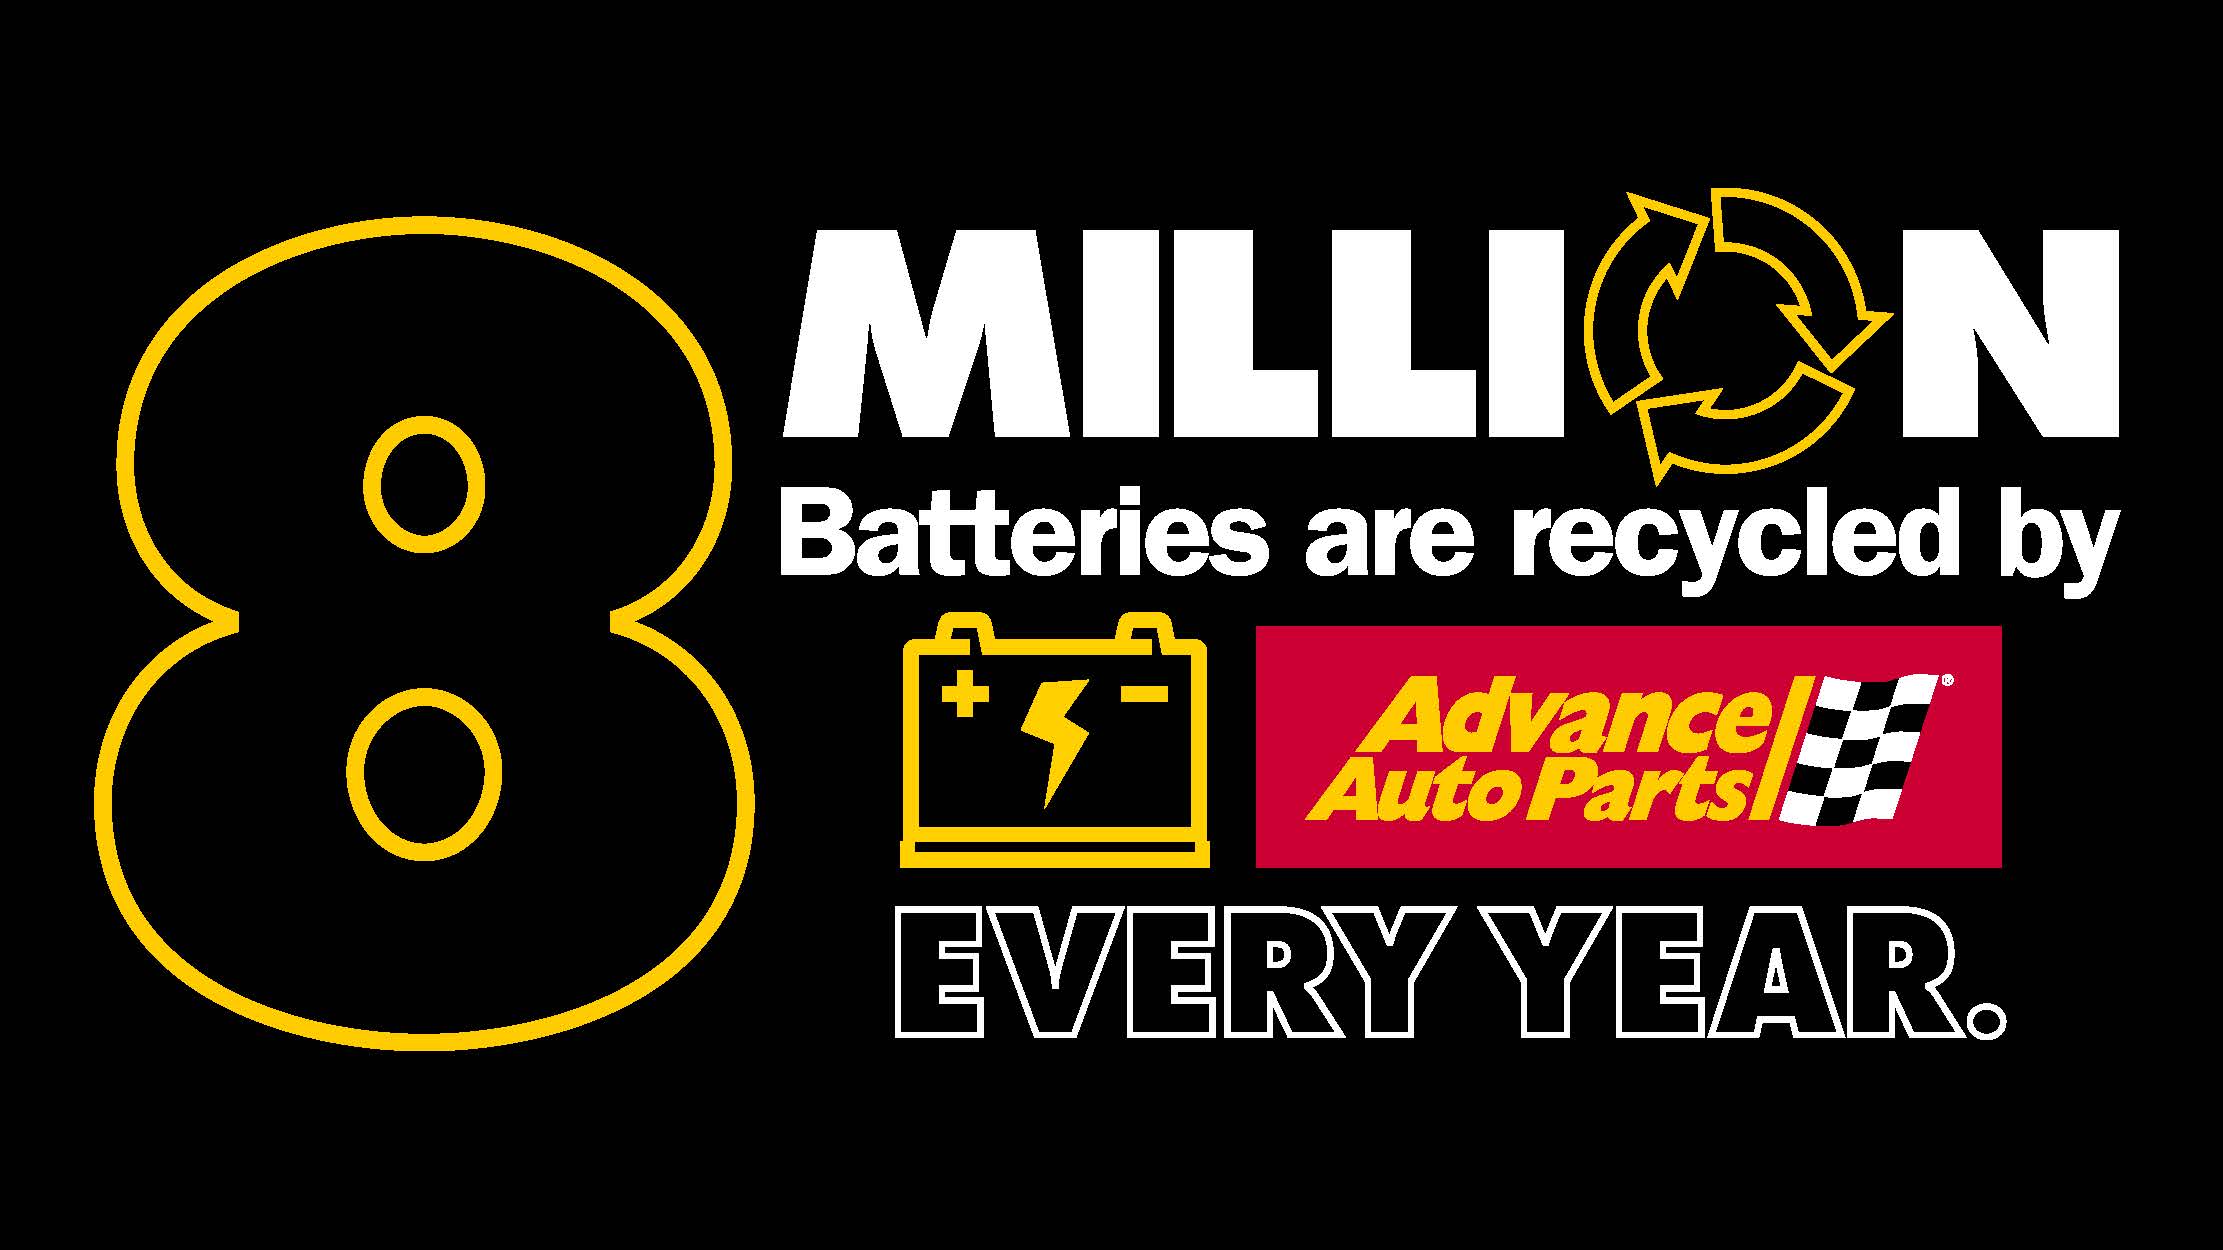 battery recycling graphic